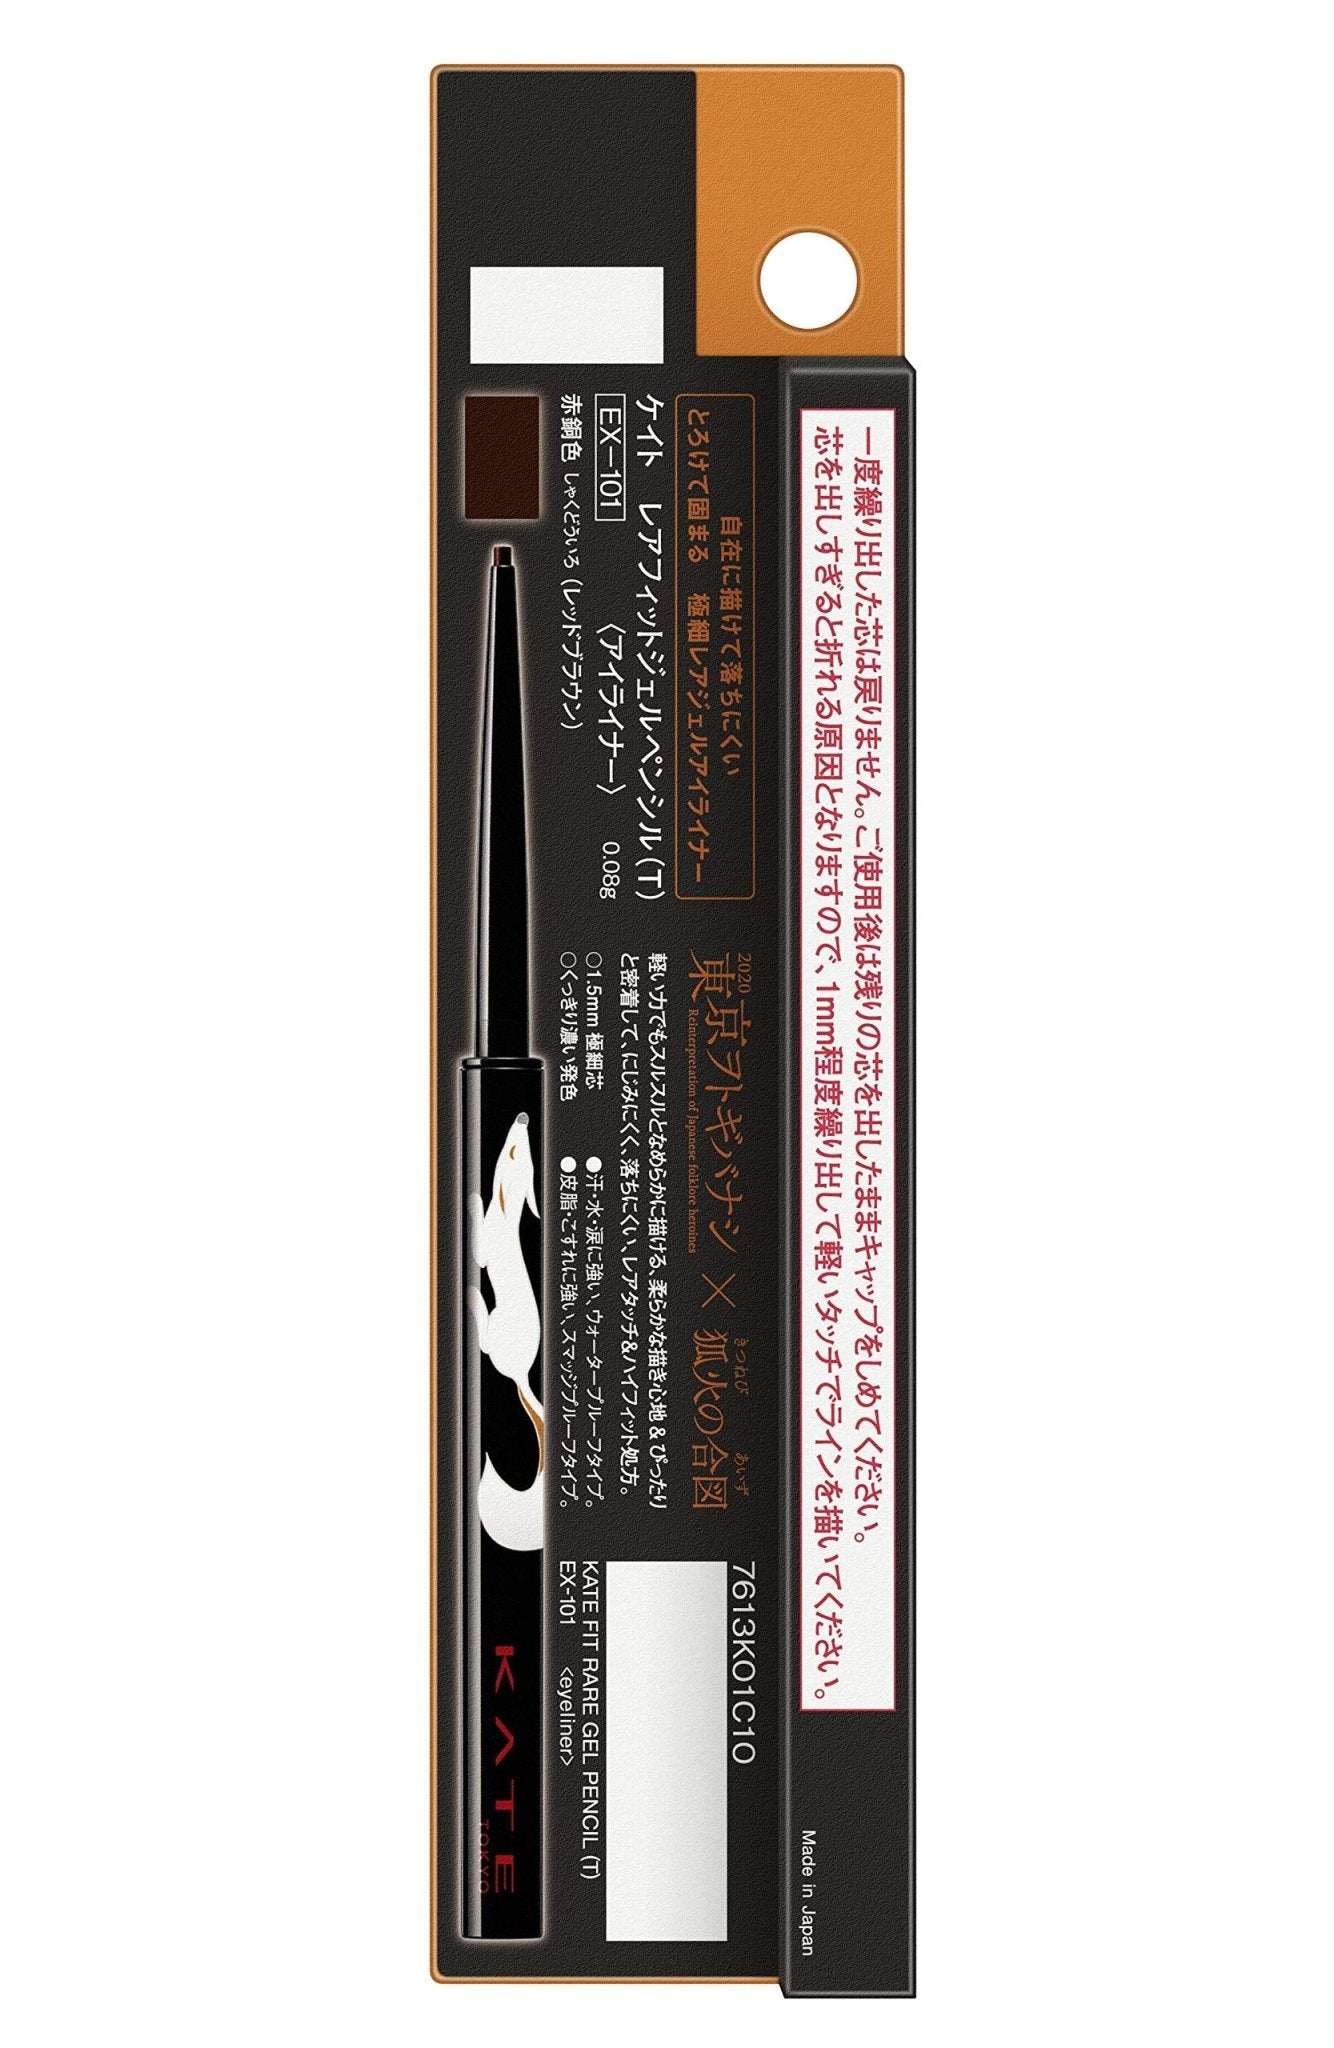 Kate Fit Gel Pencil Eyeliner 0.08G Red Copper (Red Brown) Color Ex - 101 Discontinued